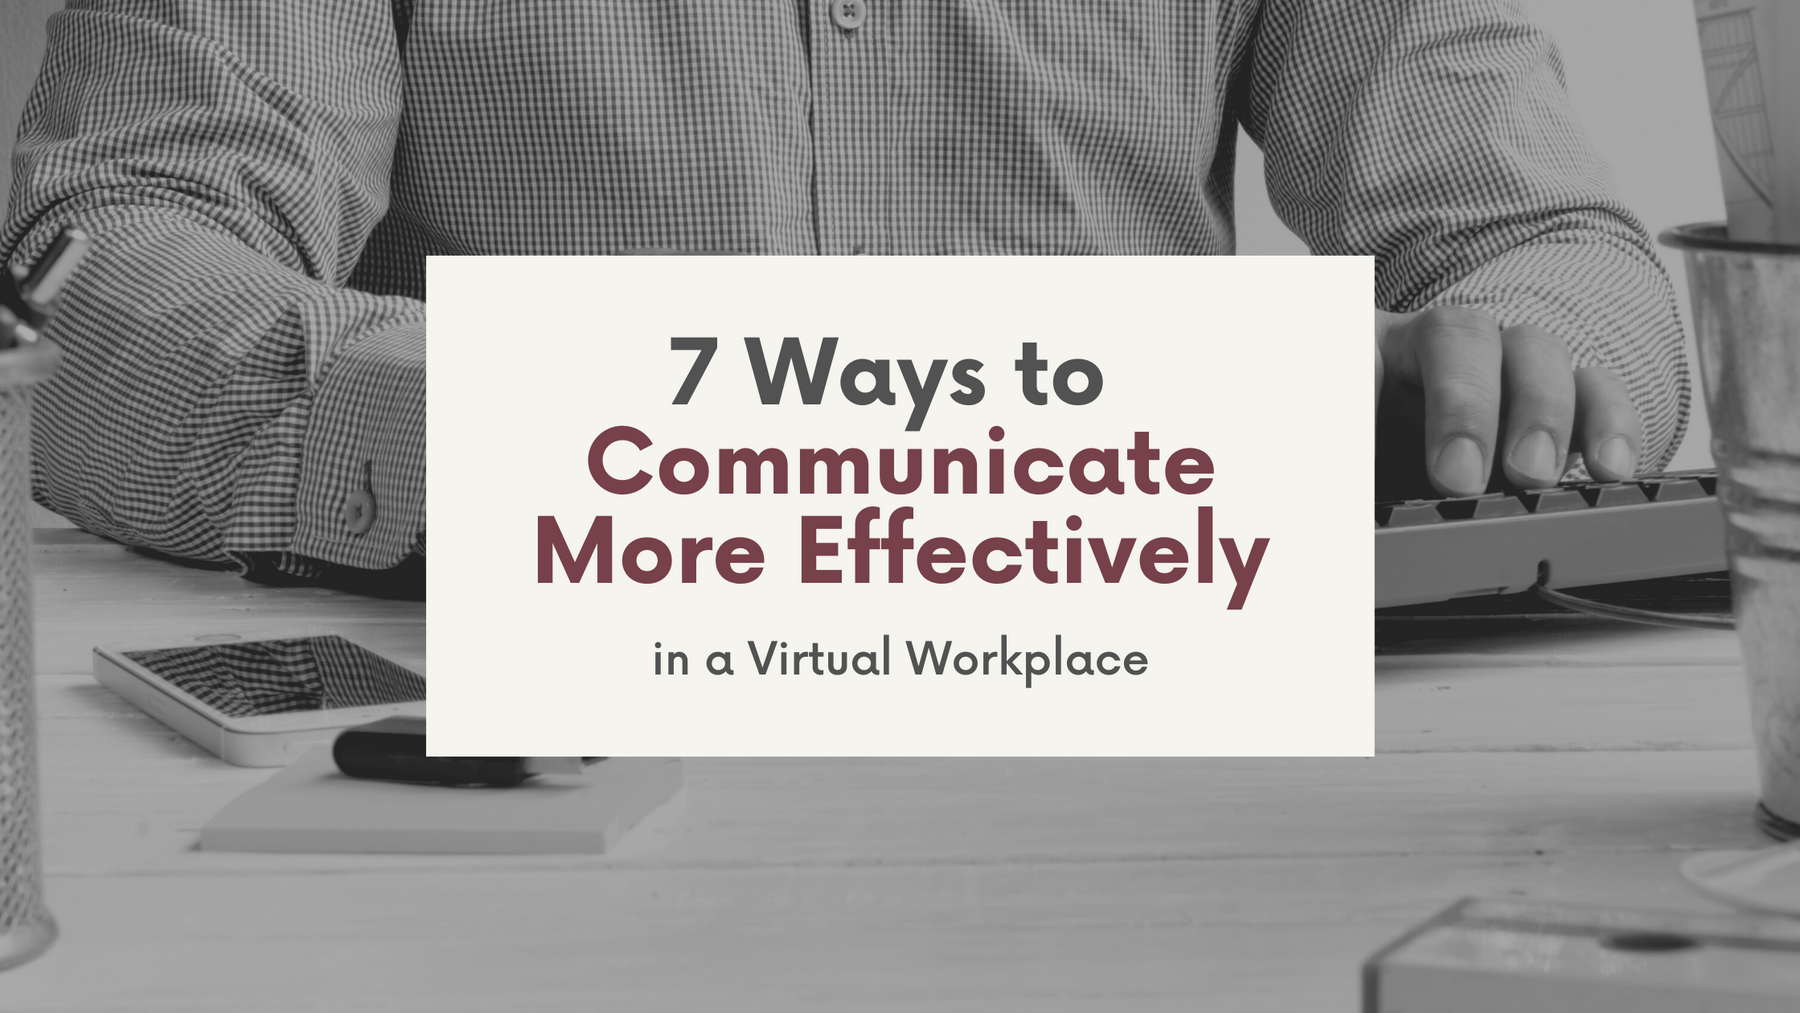 learn how to Communicate More Effectively in the Virtual Workspace